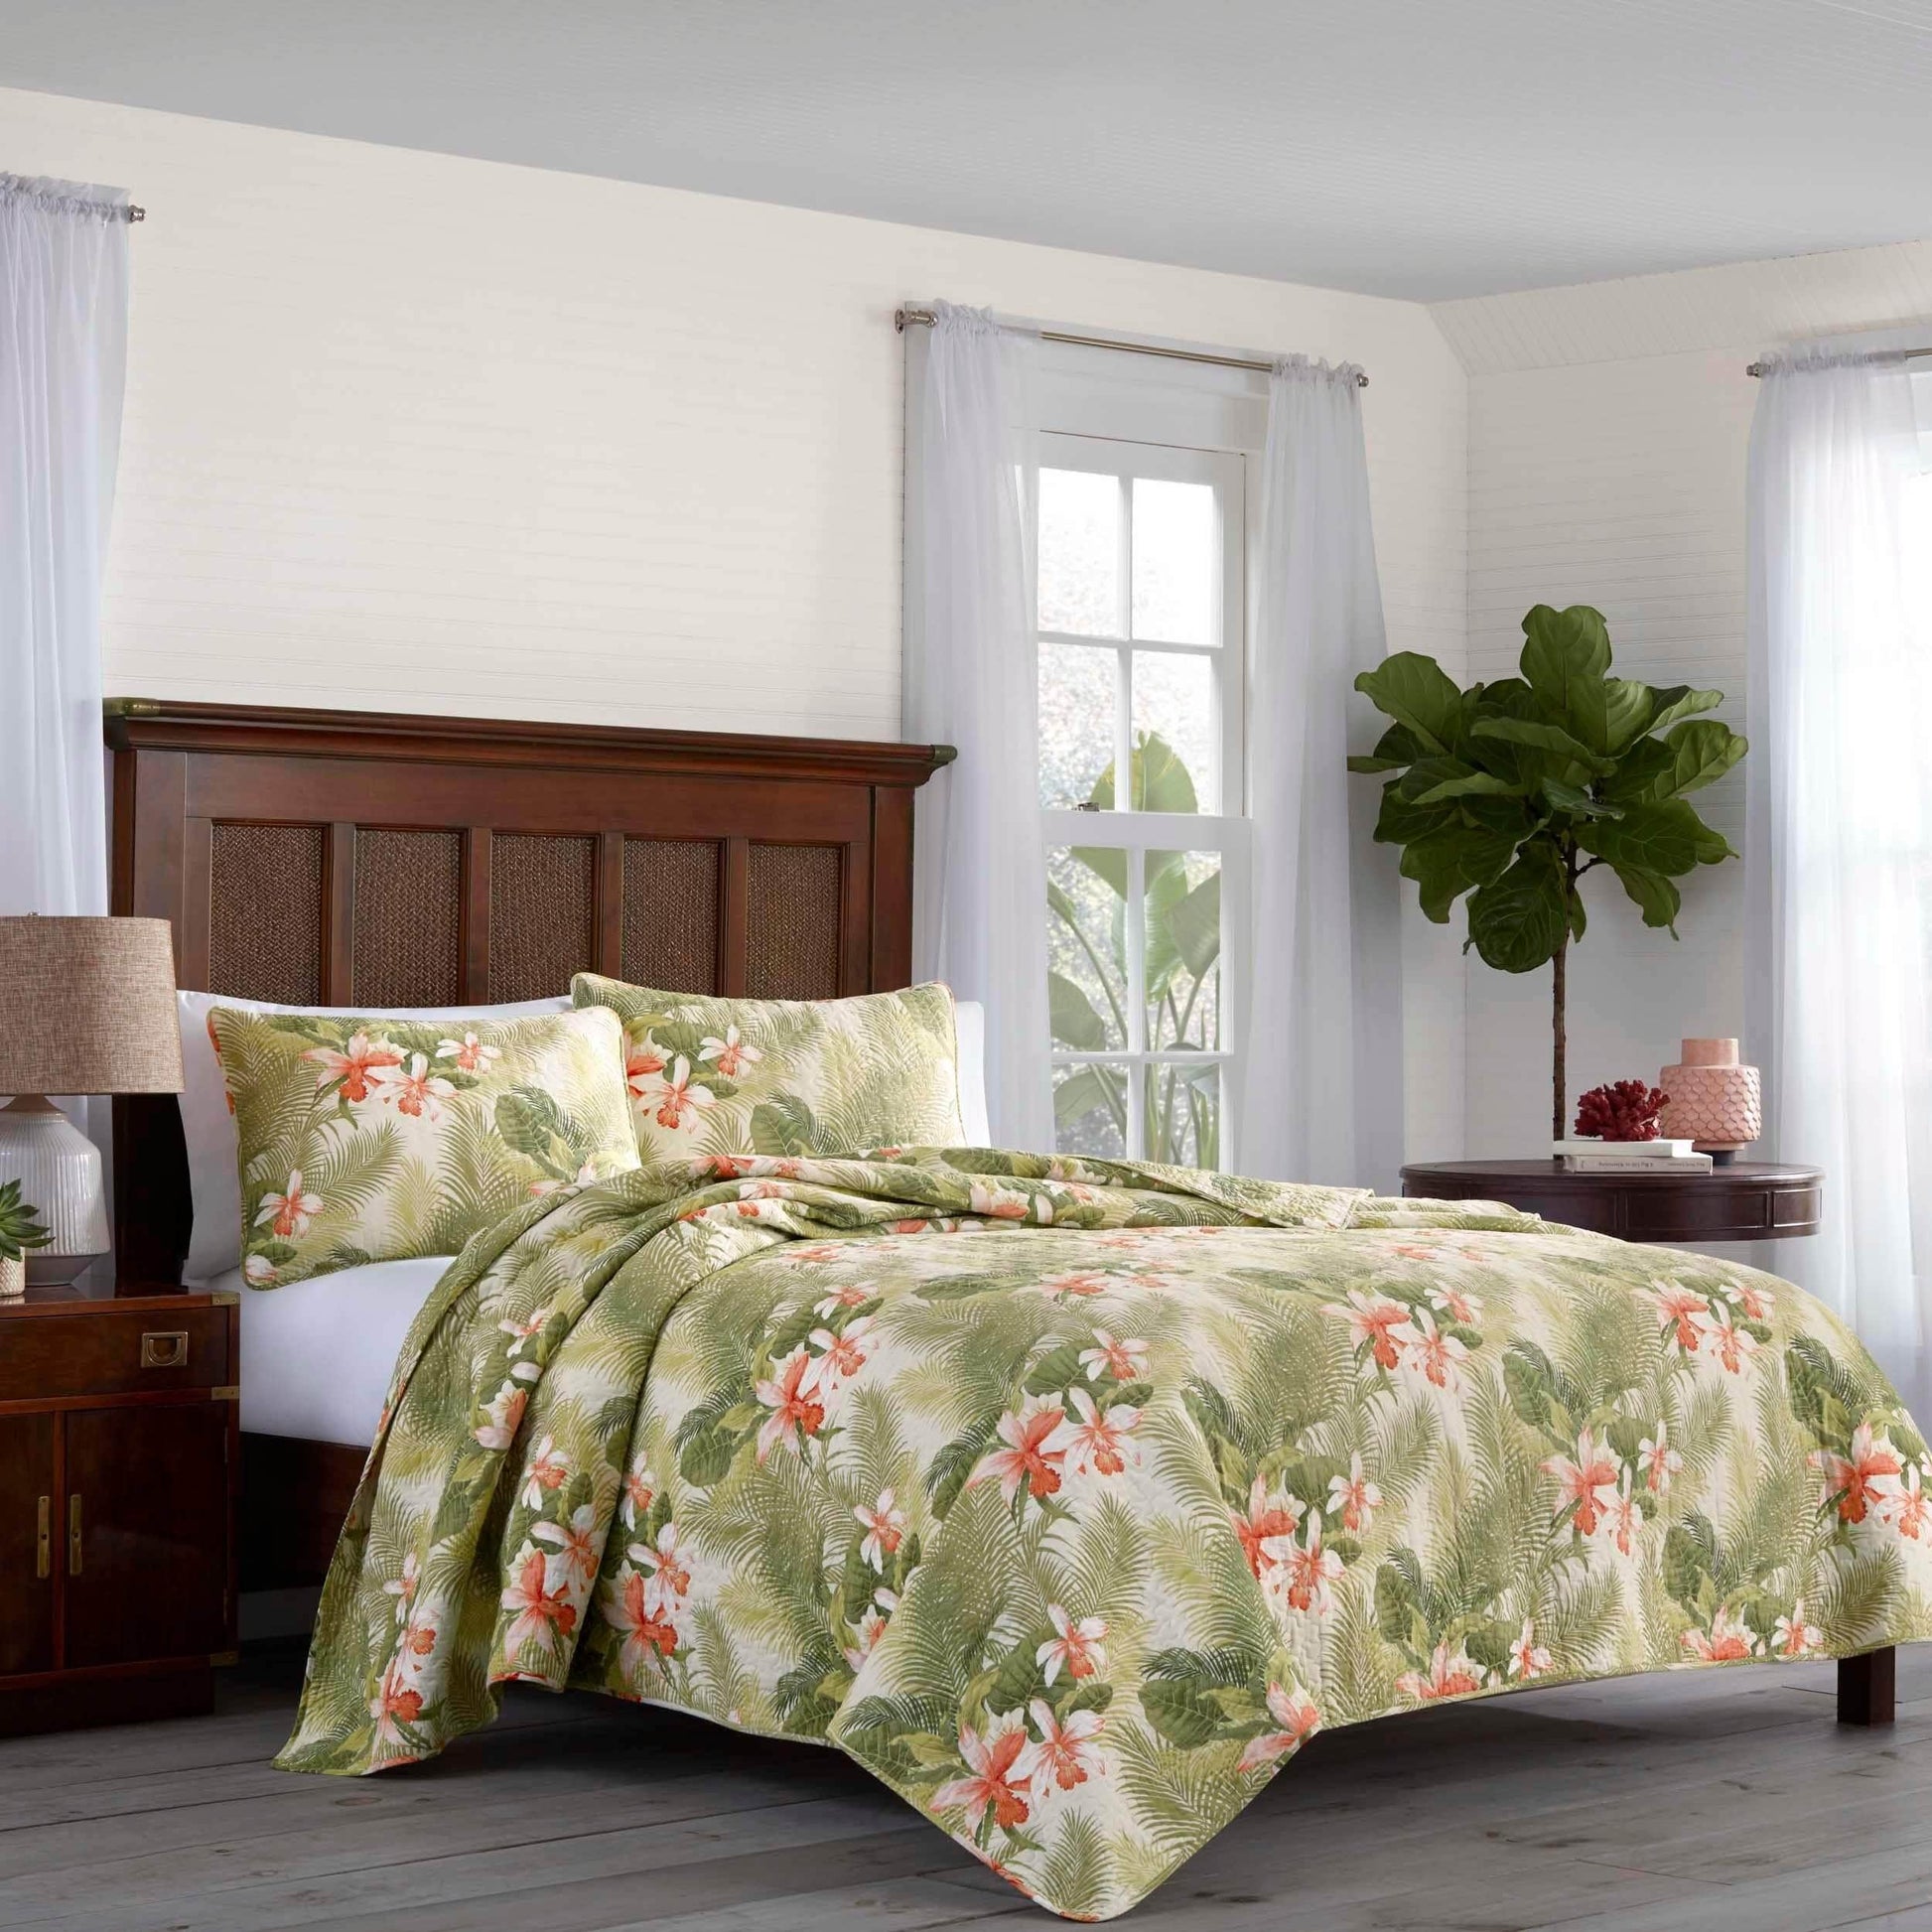 TOMMY BAHAMA Comforter/Quilt/Duvet King / Palm Green TOMMY BAHAMA - Tropical Orchid Quilt Sham Set - 3 Pieces